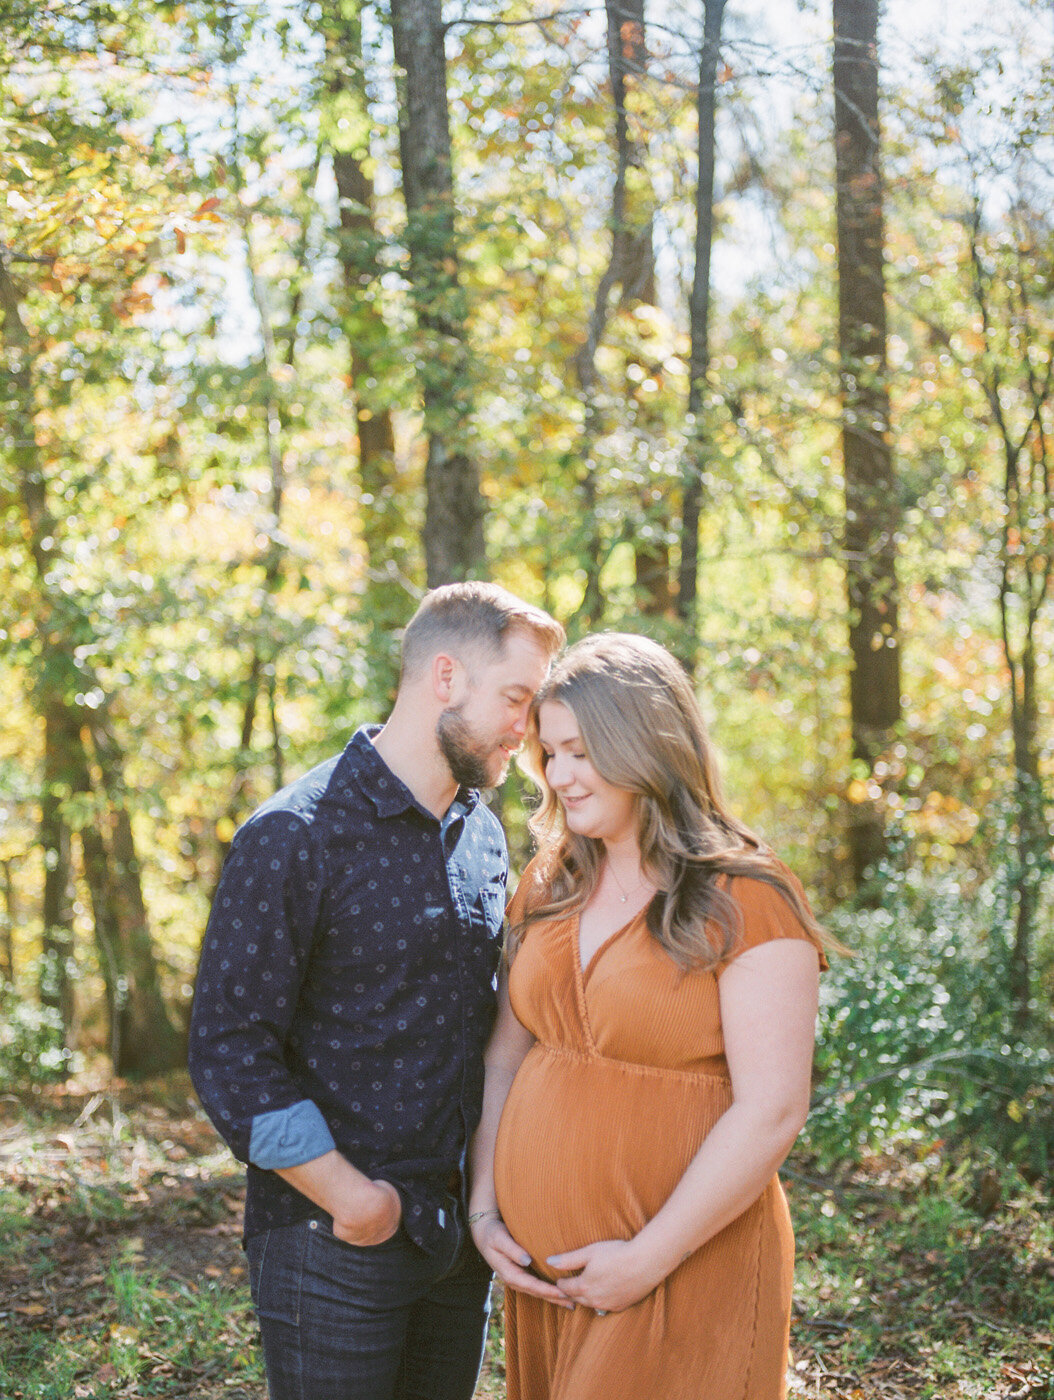 Raleigh Maternity Photographer | Jessica Agee Photography - 014